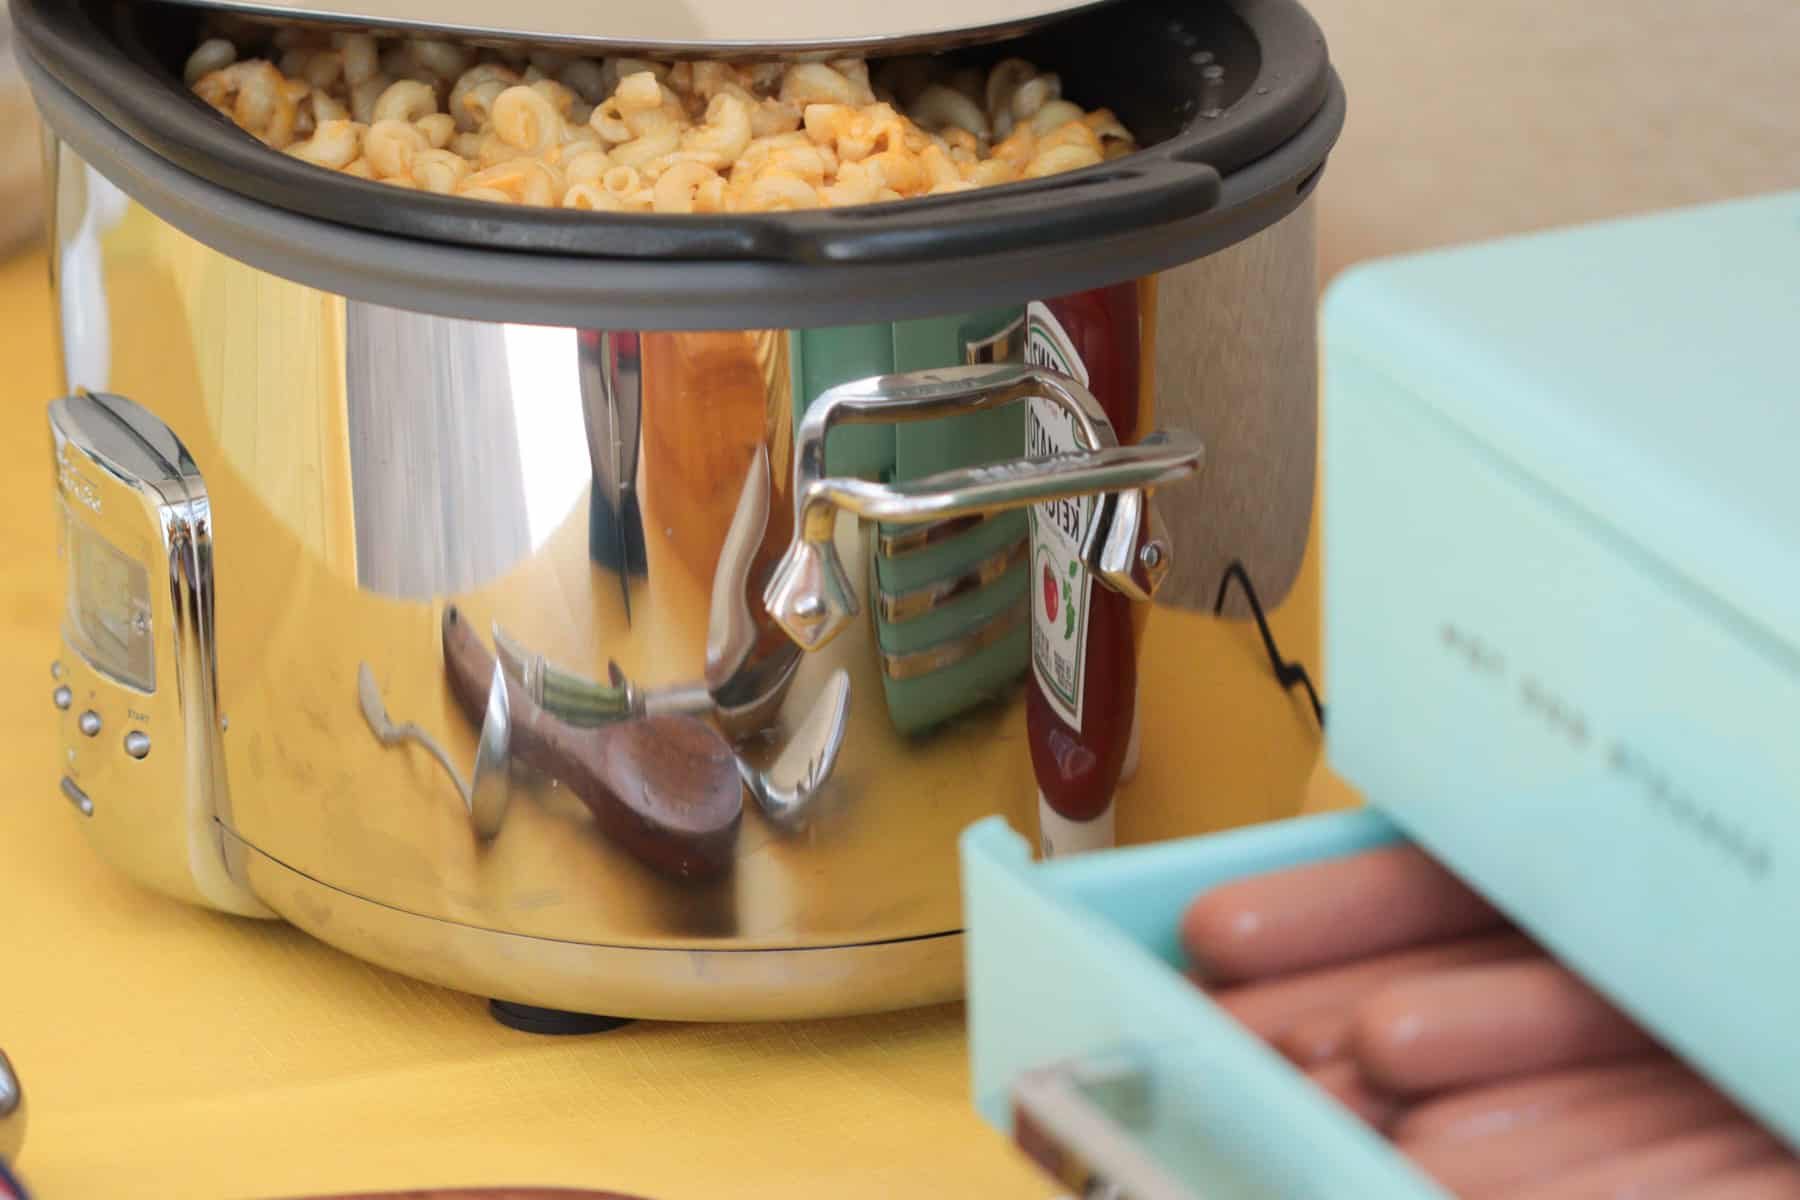 Slow cooker with mac and cheese and hot dog steamer.